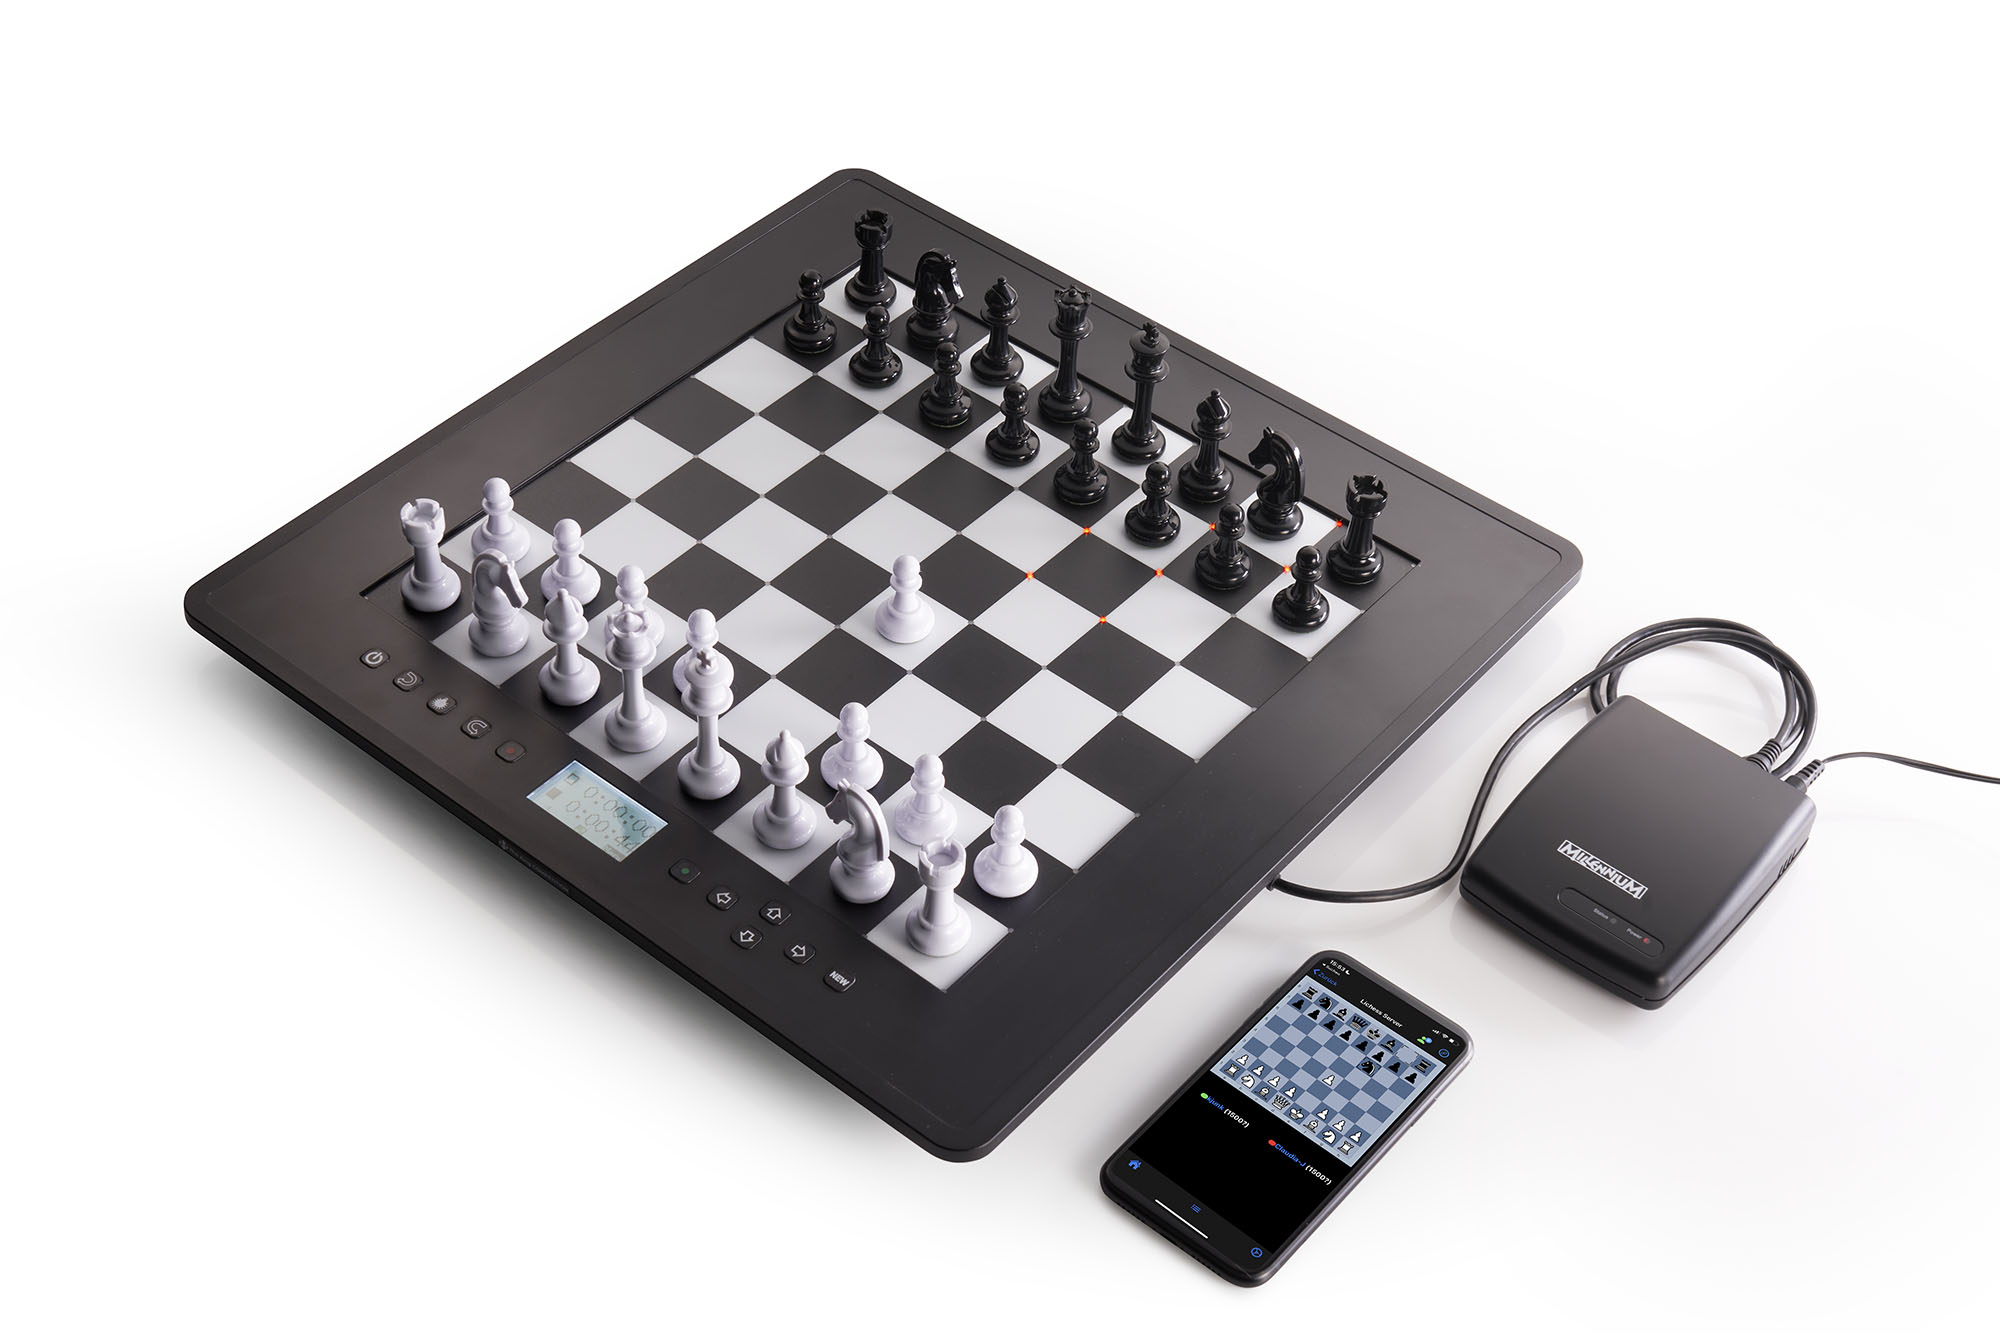 The King Competition Schachcomputer Millennium Chess